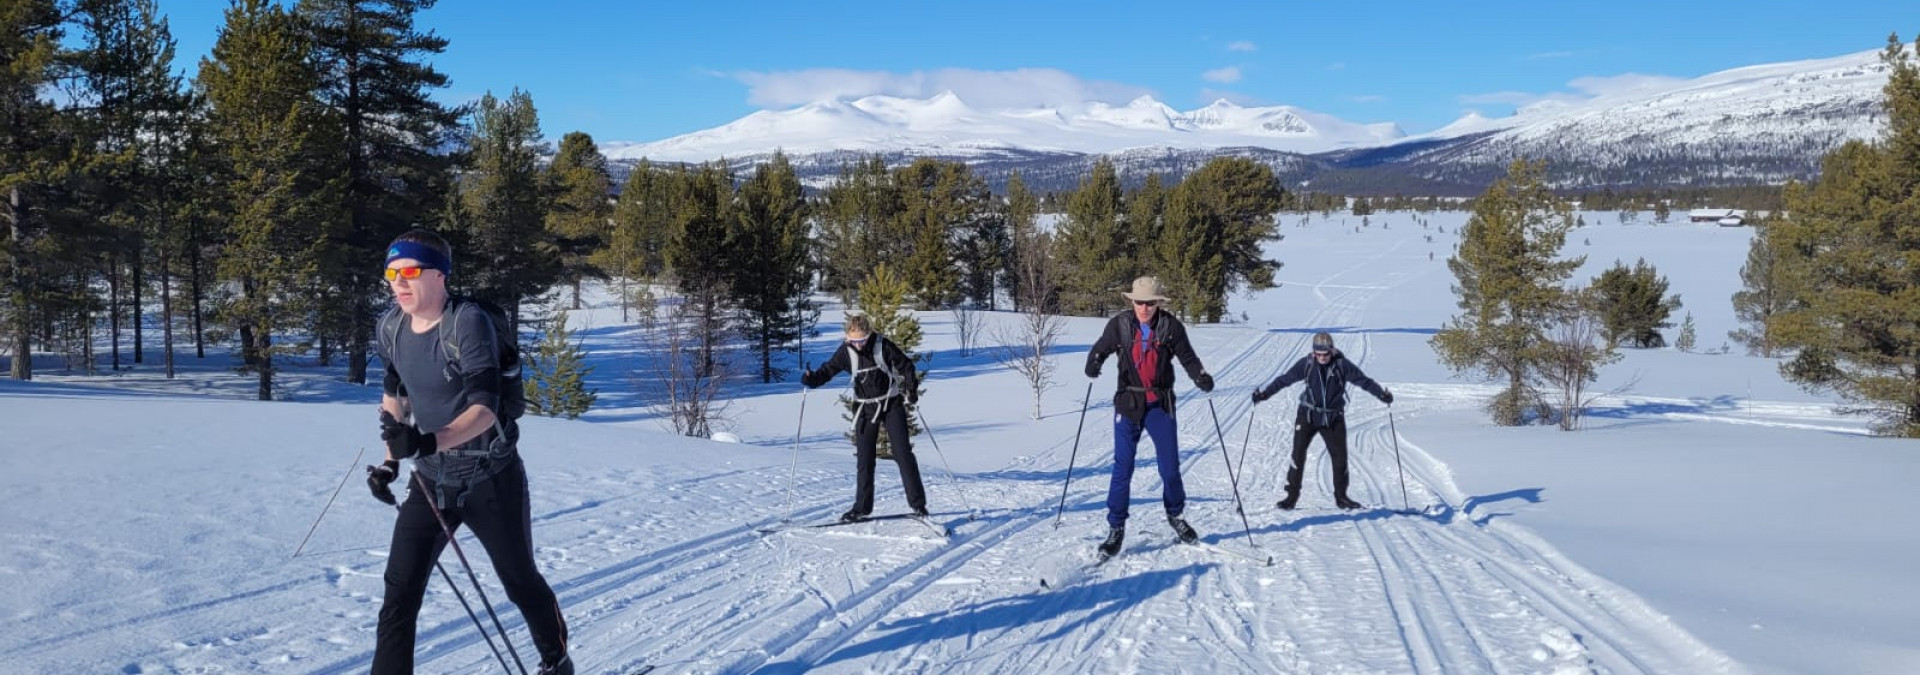 Skiing in action on the track in Rondane.